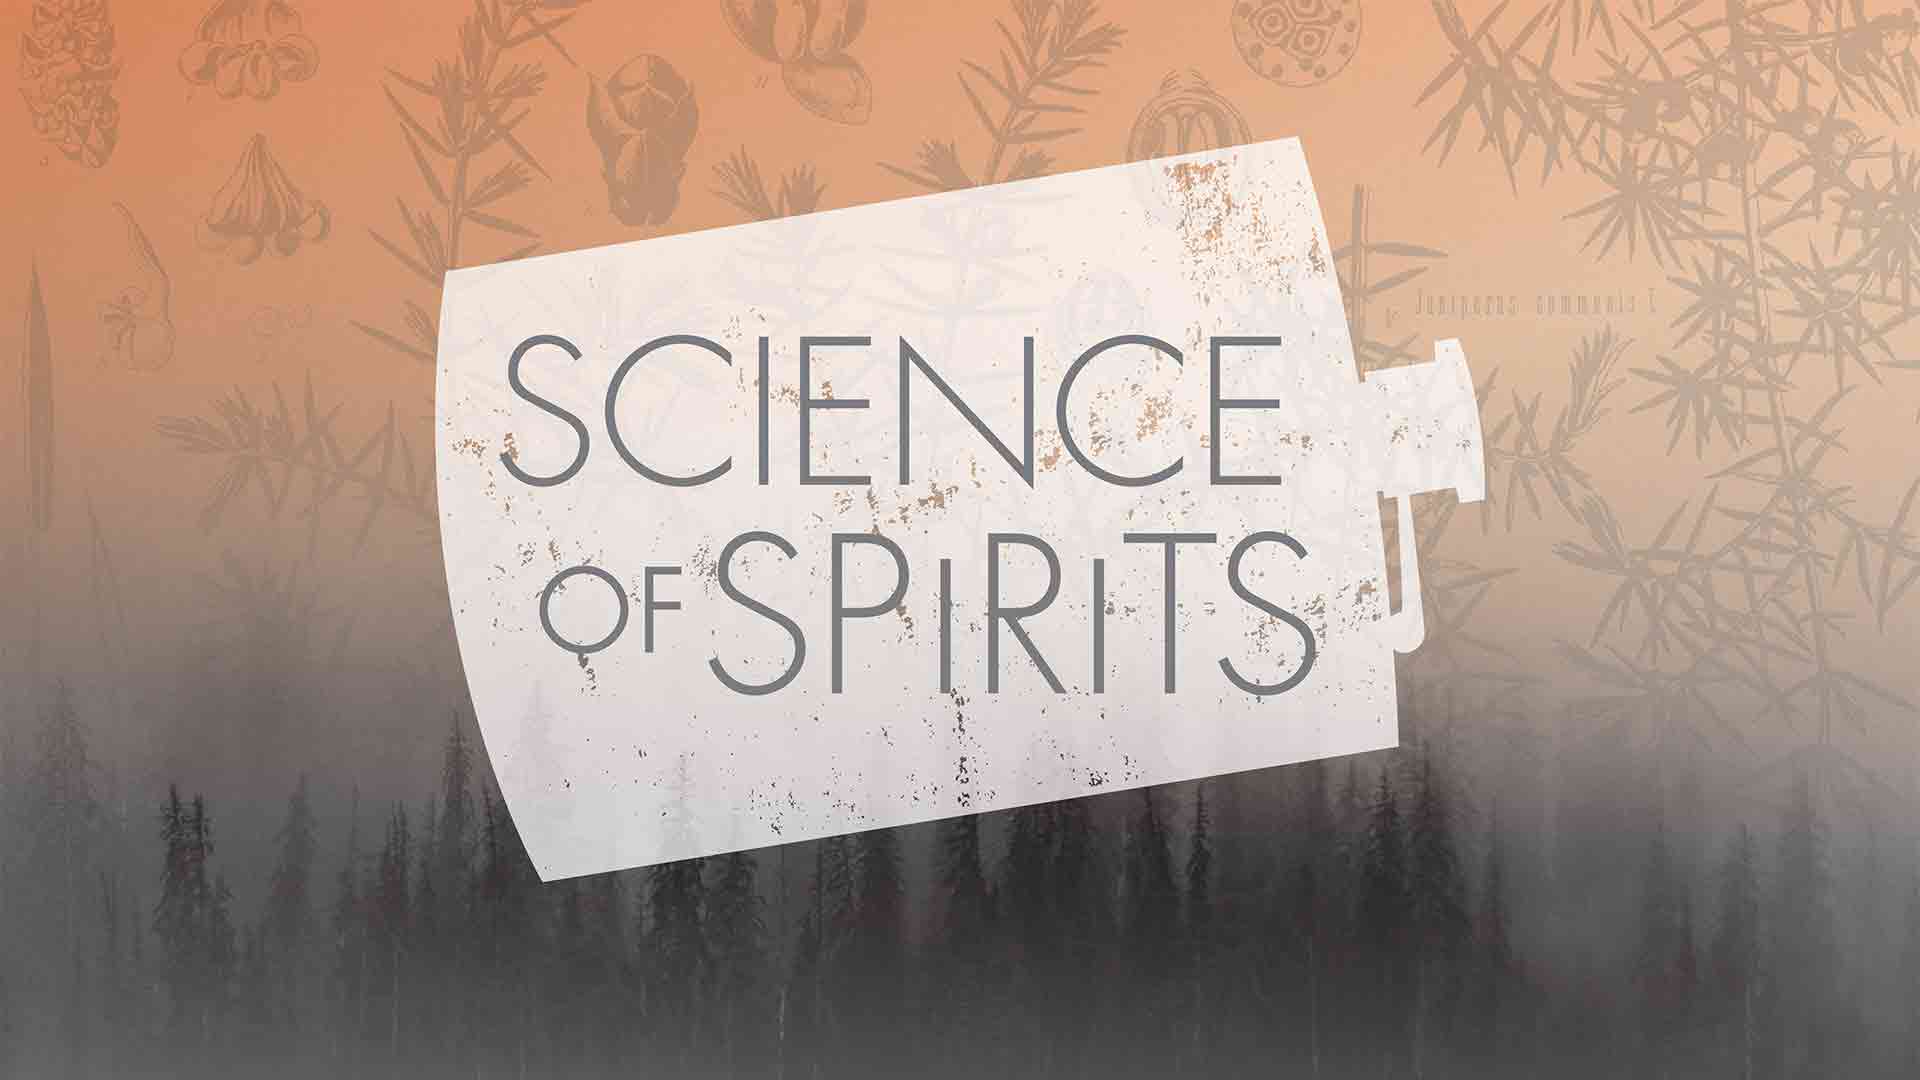 Science of spirits